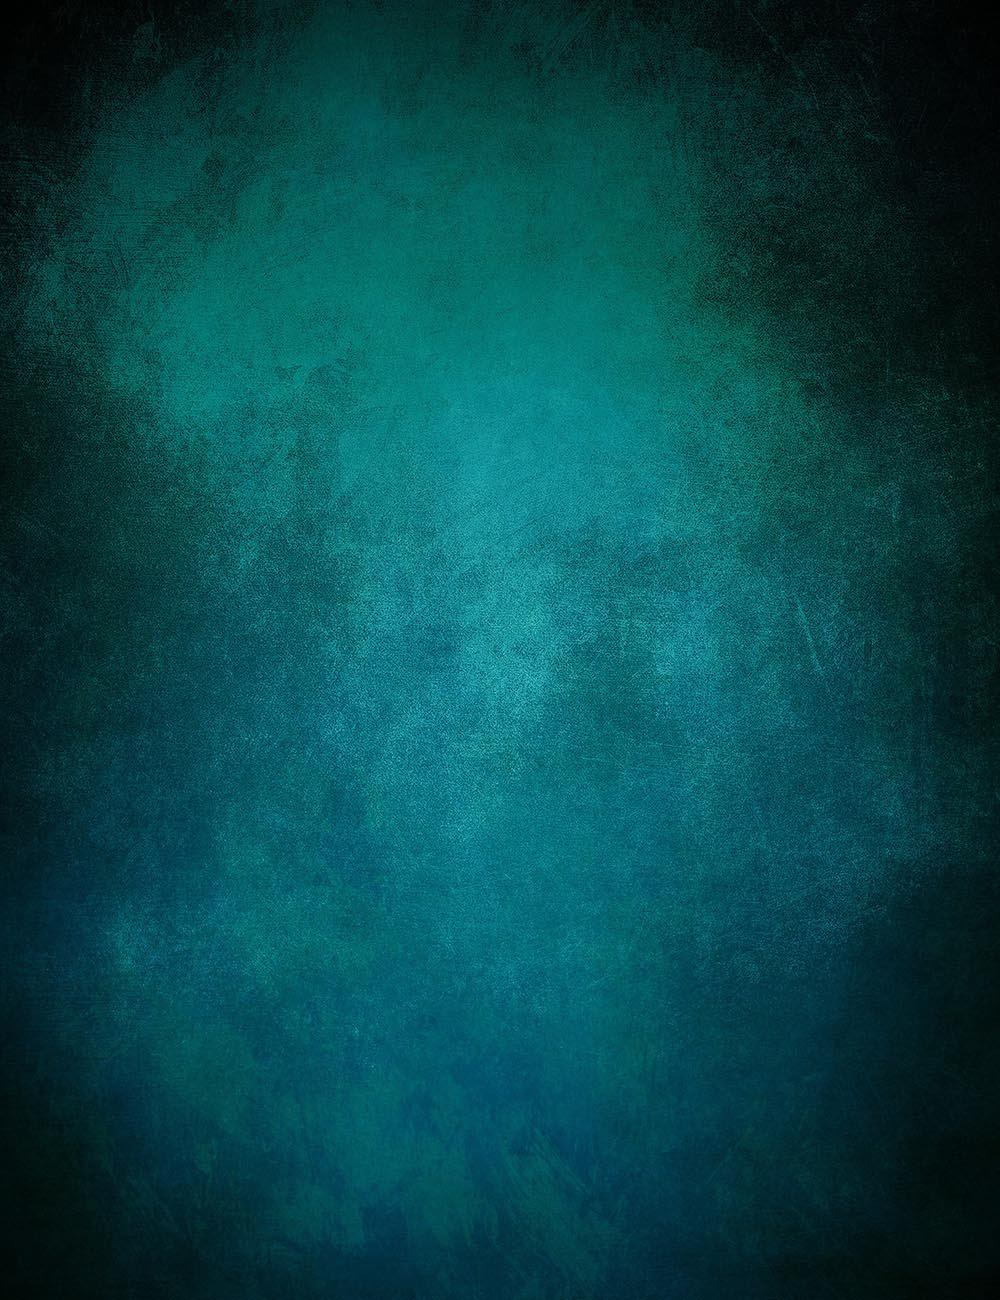 Oil Painted Dark Cyan With Black Around Edges Photography Backdrop J-0707 Shopbackdrop